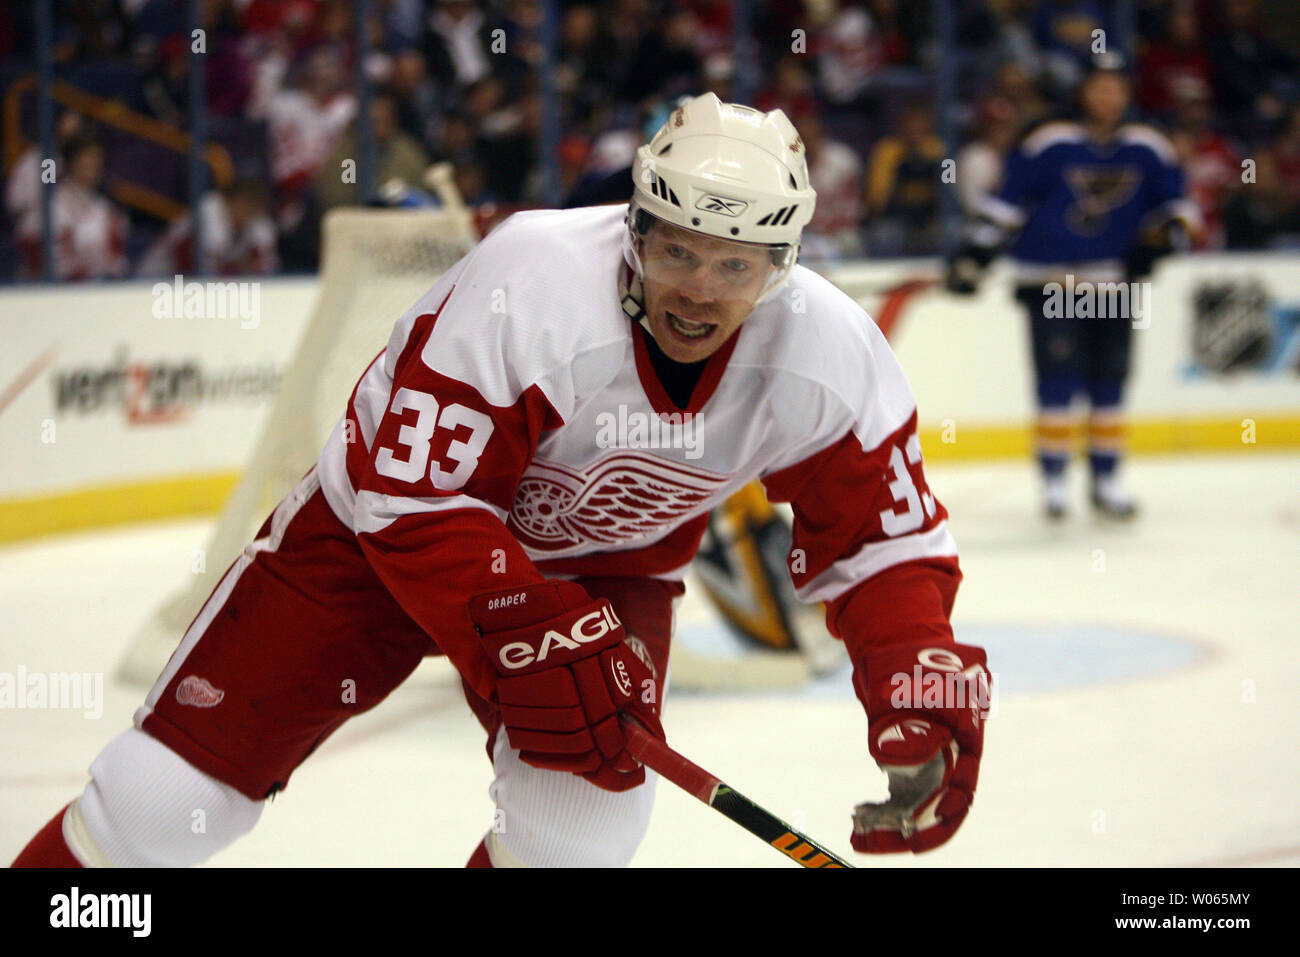 Detroit Red Wings Brendan Shanahan waits for the drop of the puck against  the St. Louis Blues in the first period at the Savvis Center in St. Louis  on March 27, 2006. (